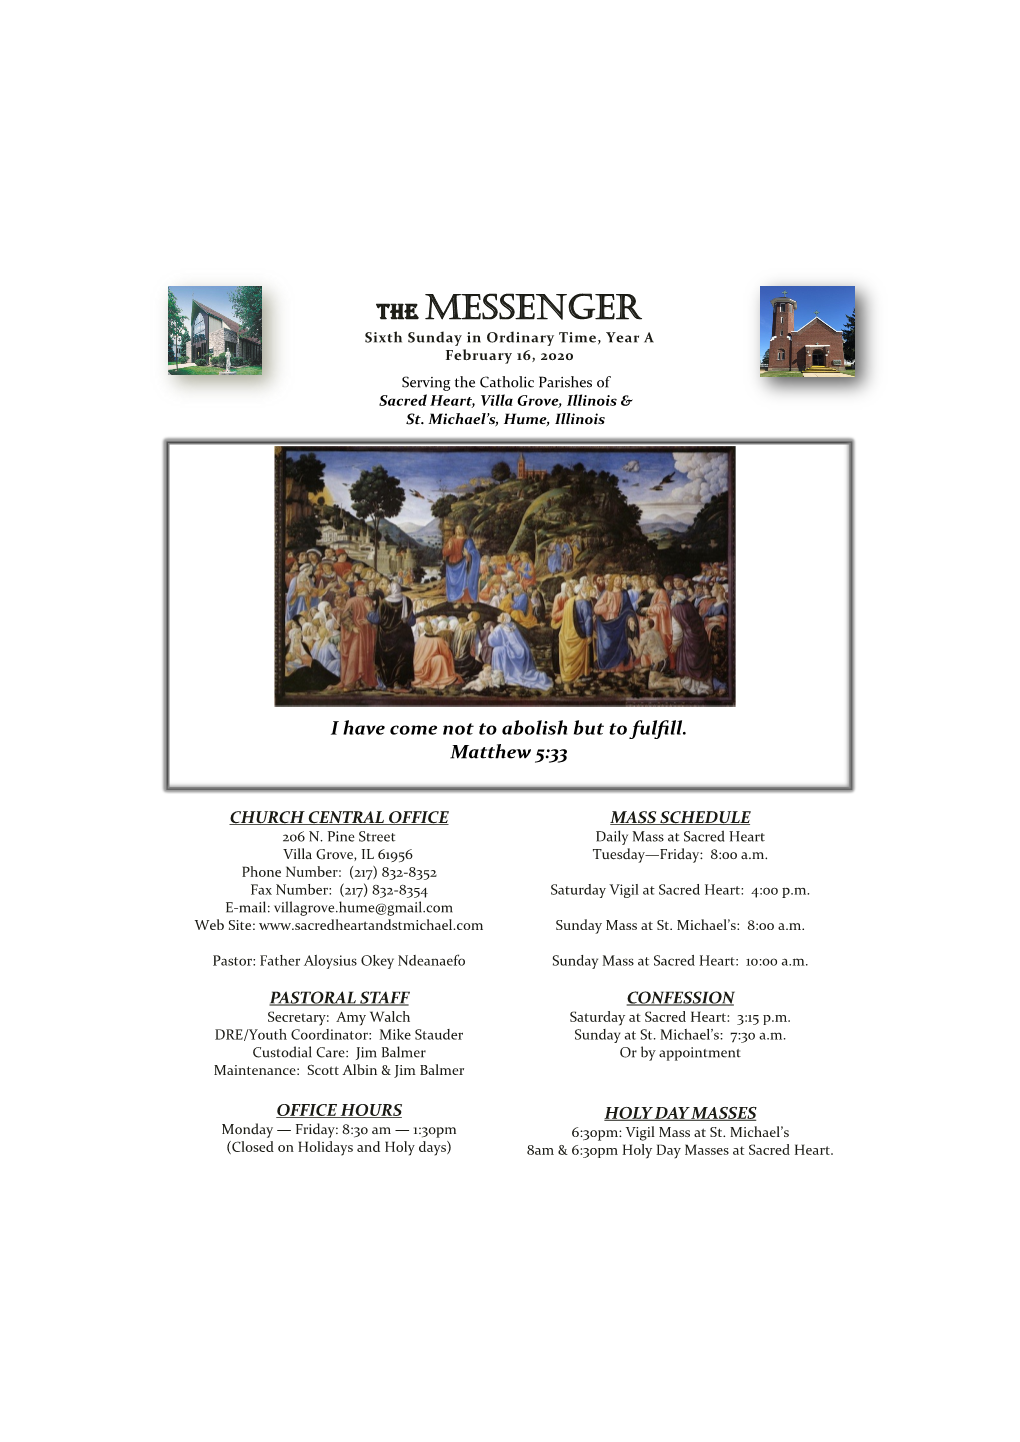 The Messenger Sixth Sunday in Ordinary Time, Year a February 16, 2020 Serving the Catholic Parishes of Sacred Heart, Villa Grove, Illinois & St